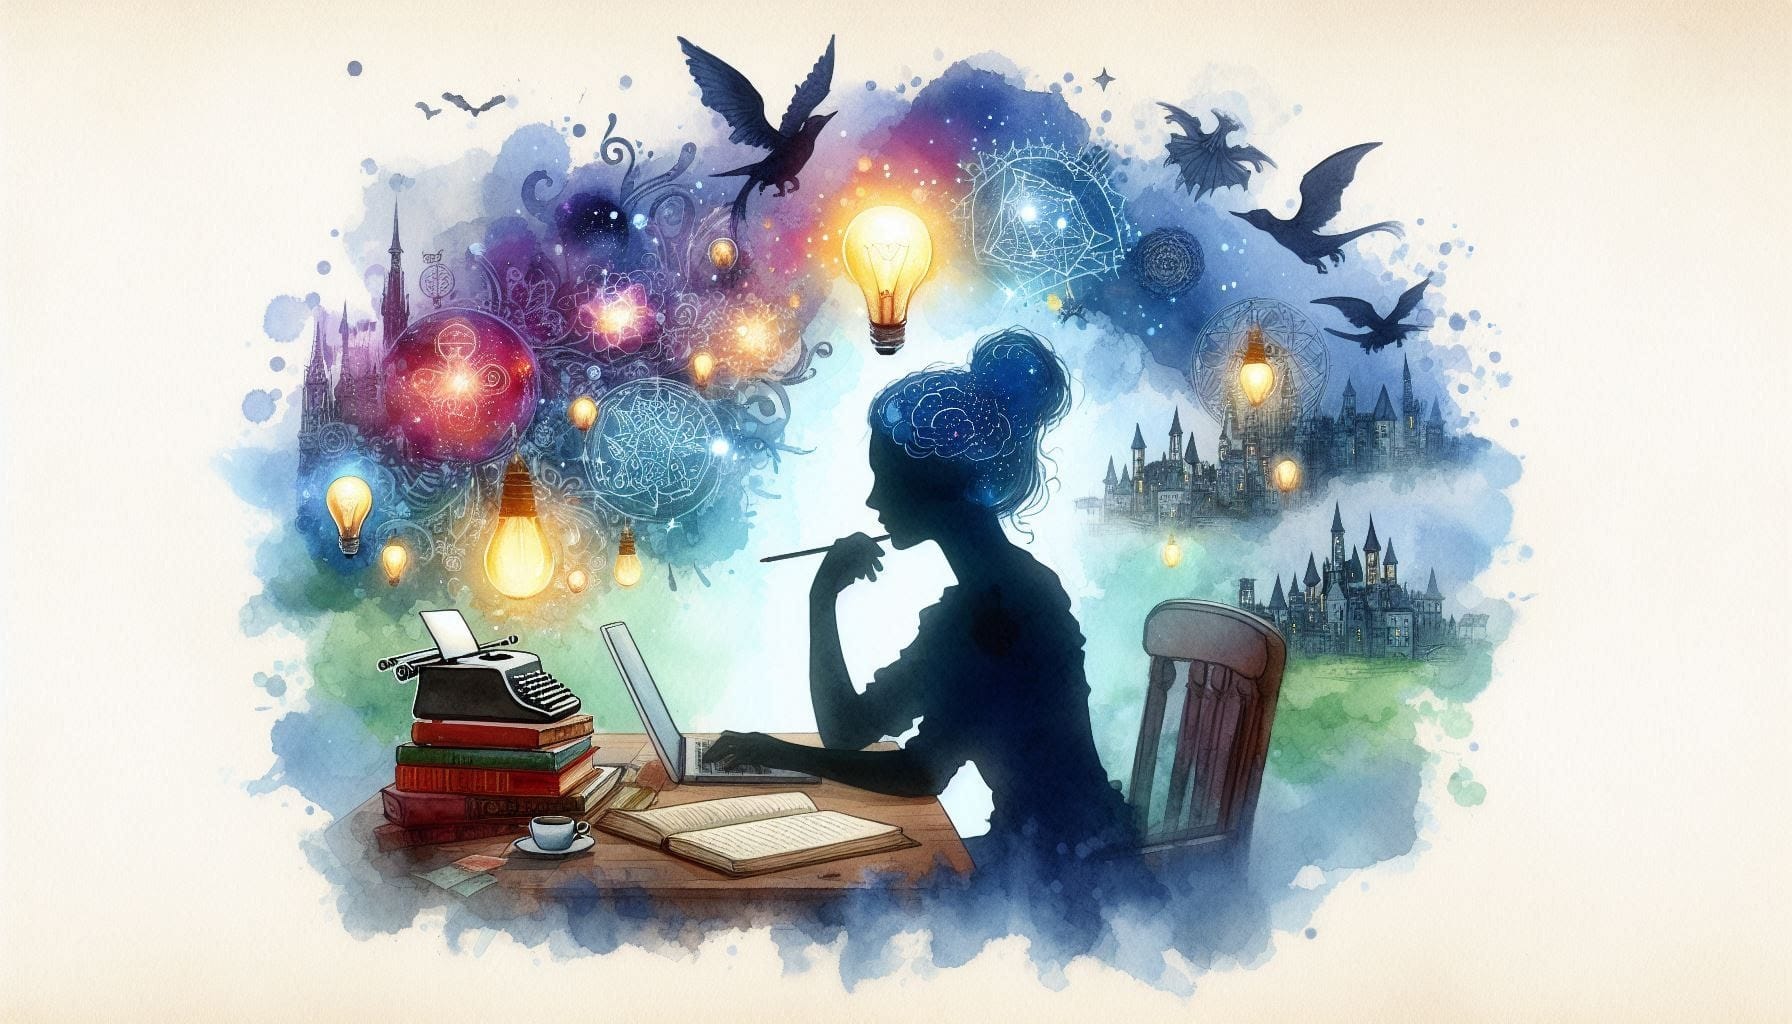 watercolour illustration featuring silhouette of a woman sitting at a desk with a laptop, typewriter and books surrounded by images of ideas